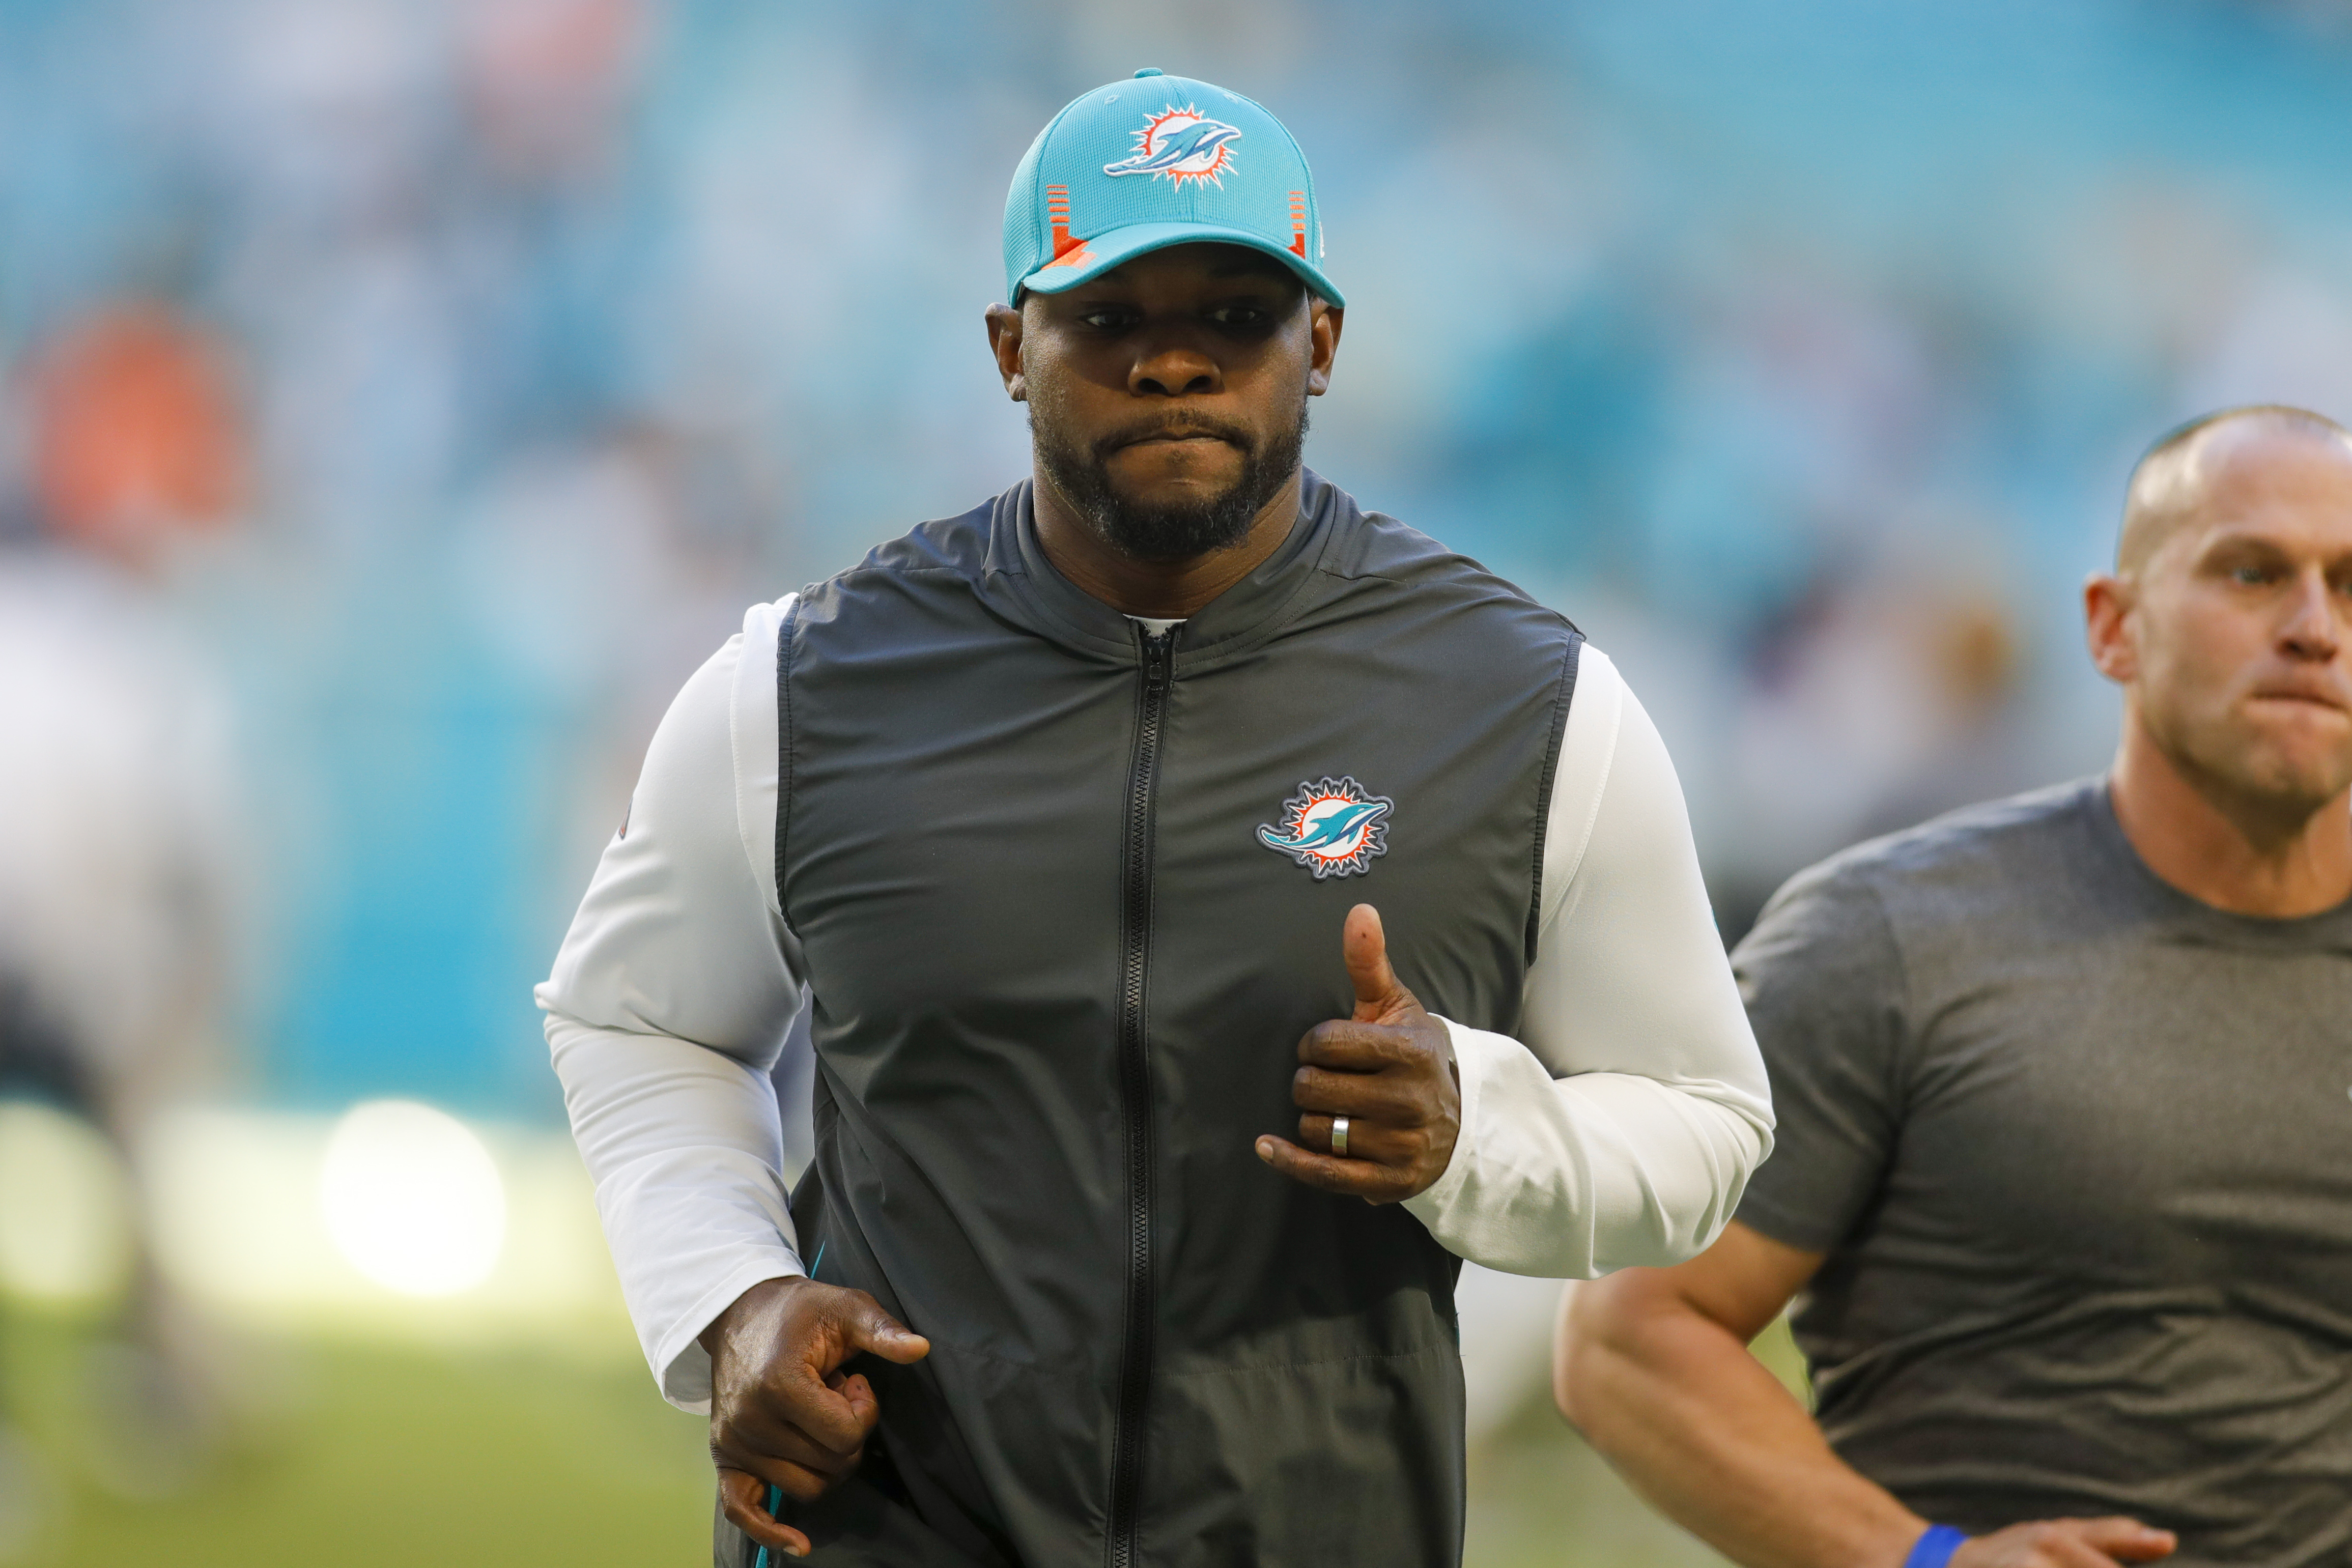 Nov 7, 2021; Miami Gardens, Florida, USA; Miami Dolphins head coach Brian Flores exits the field after the game against the Houston Texans at Hard Rock Stadium. Mandatory Credit: Sam Navarro-USA TODAY Sports